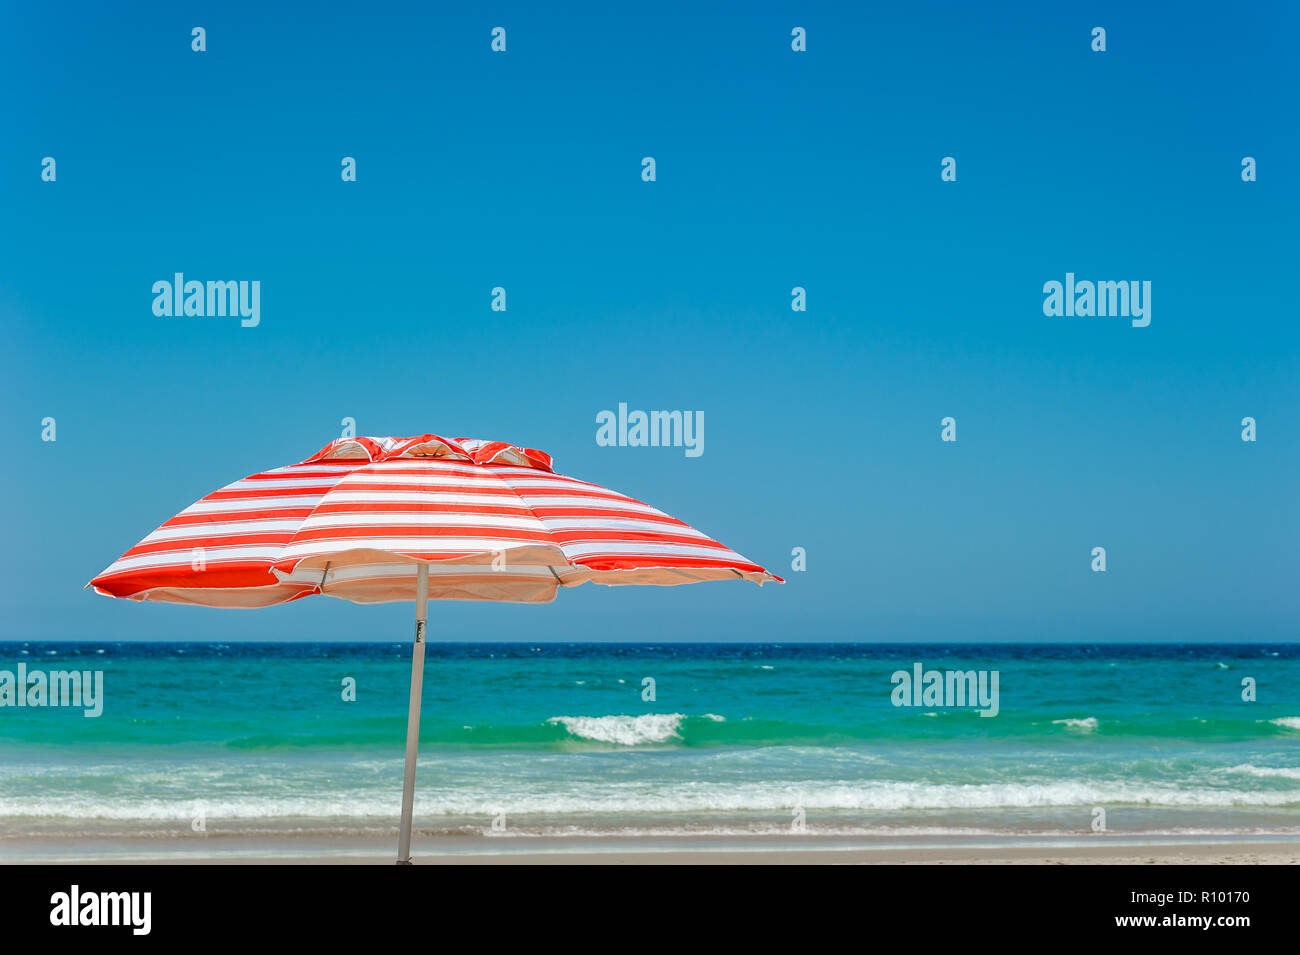 My red and white striped beach umbrella stands as an iconic symbol to a beach lifestyle and culture on Surfer's Paradise Beach at the Gold Coast. Stock Photo